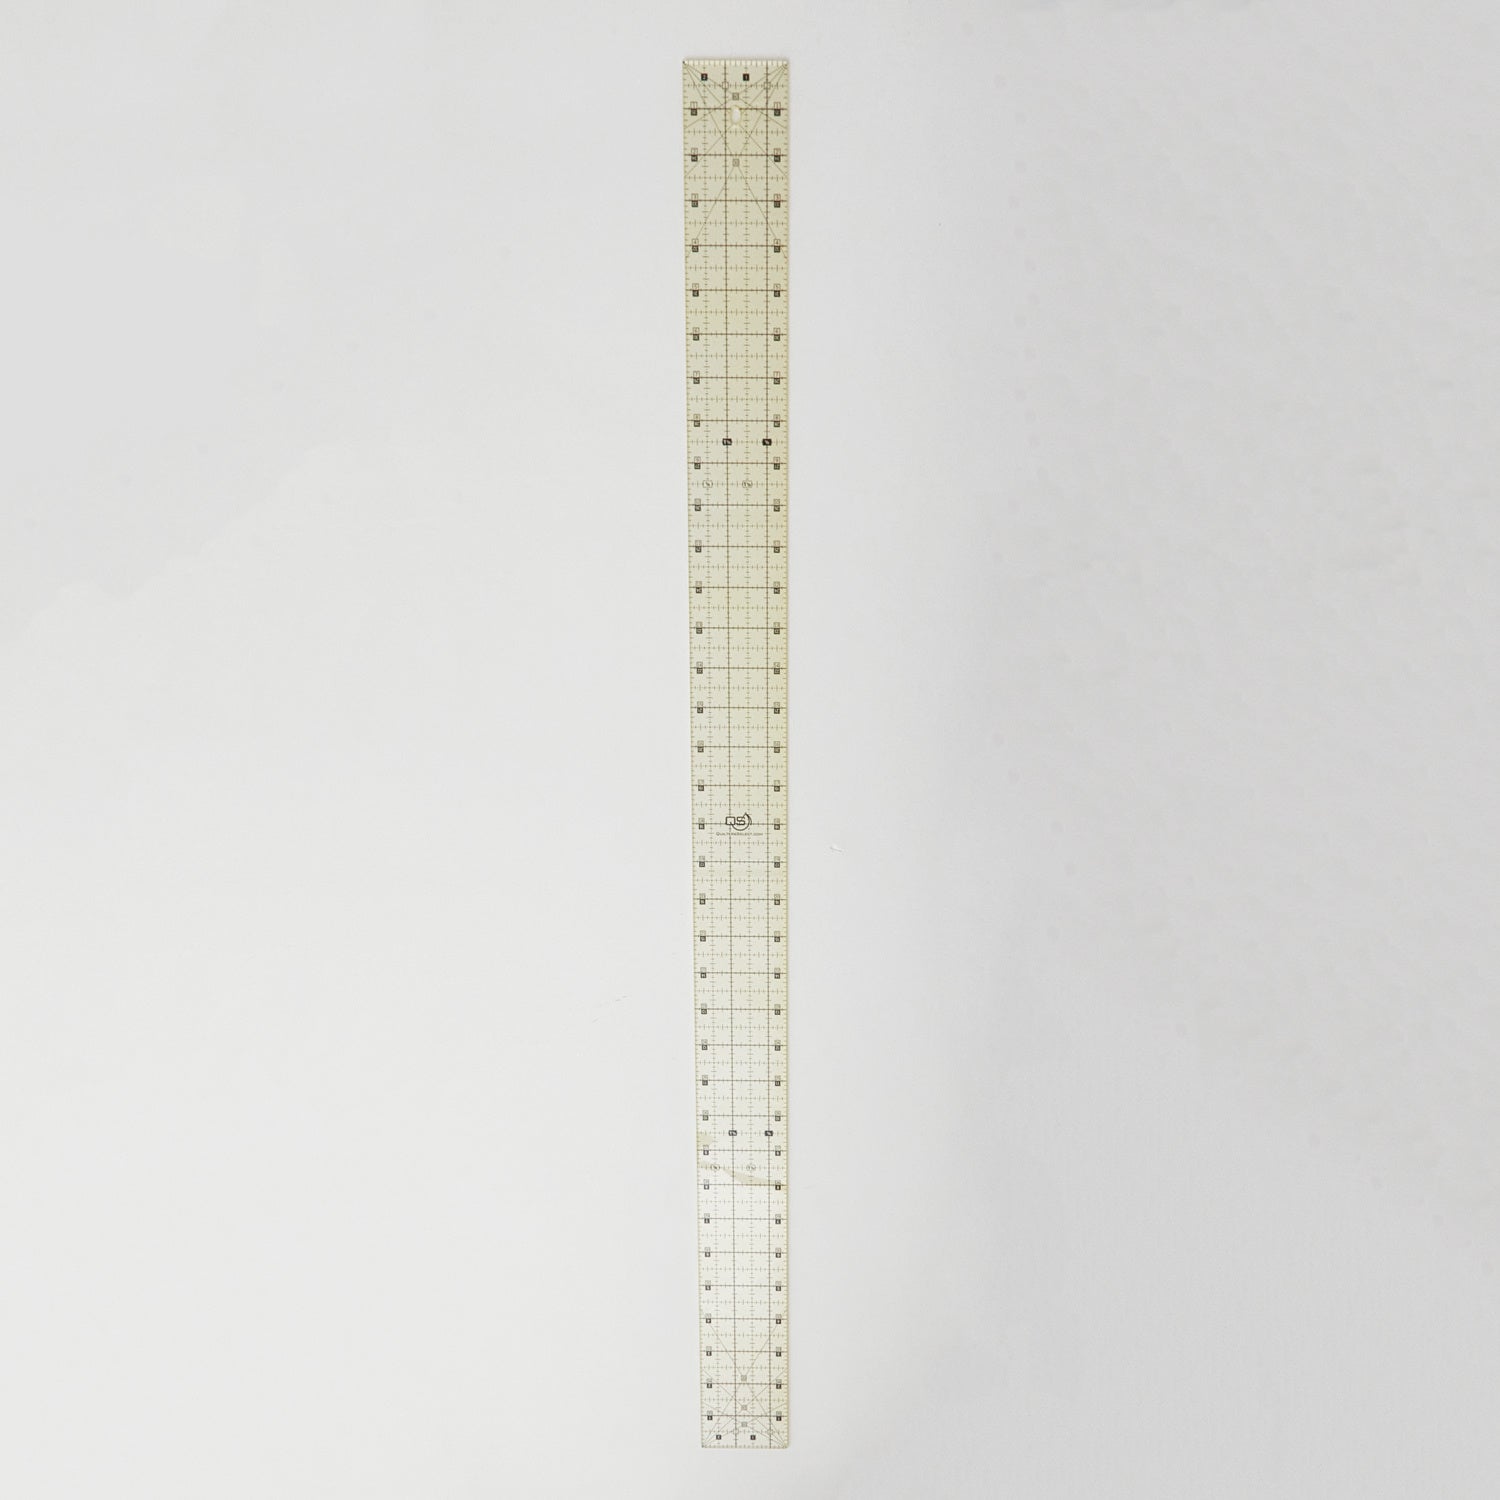 6 x 12 Ruler- Quilters Select Non-Slip 6 x 12 Ruler for Quilters